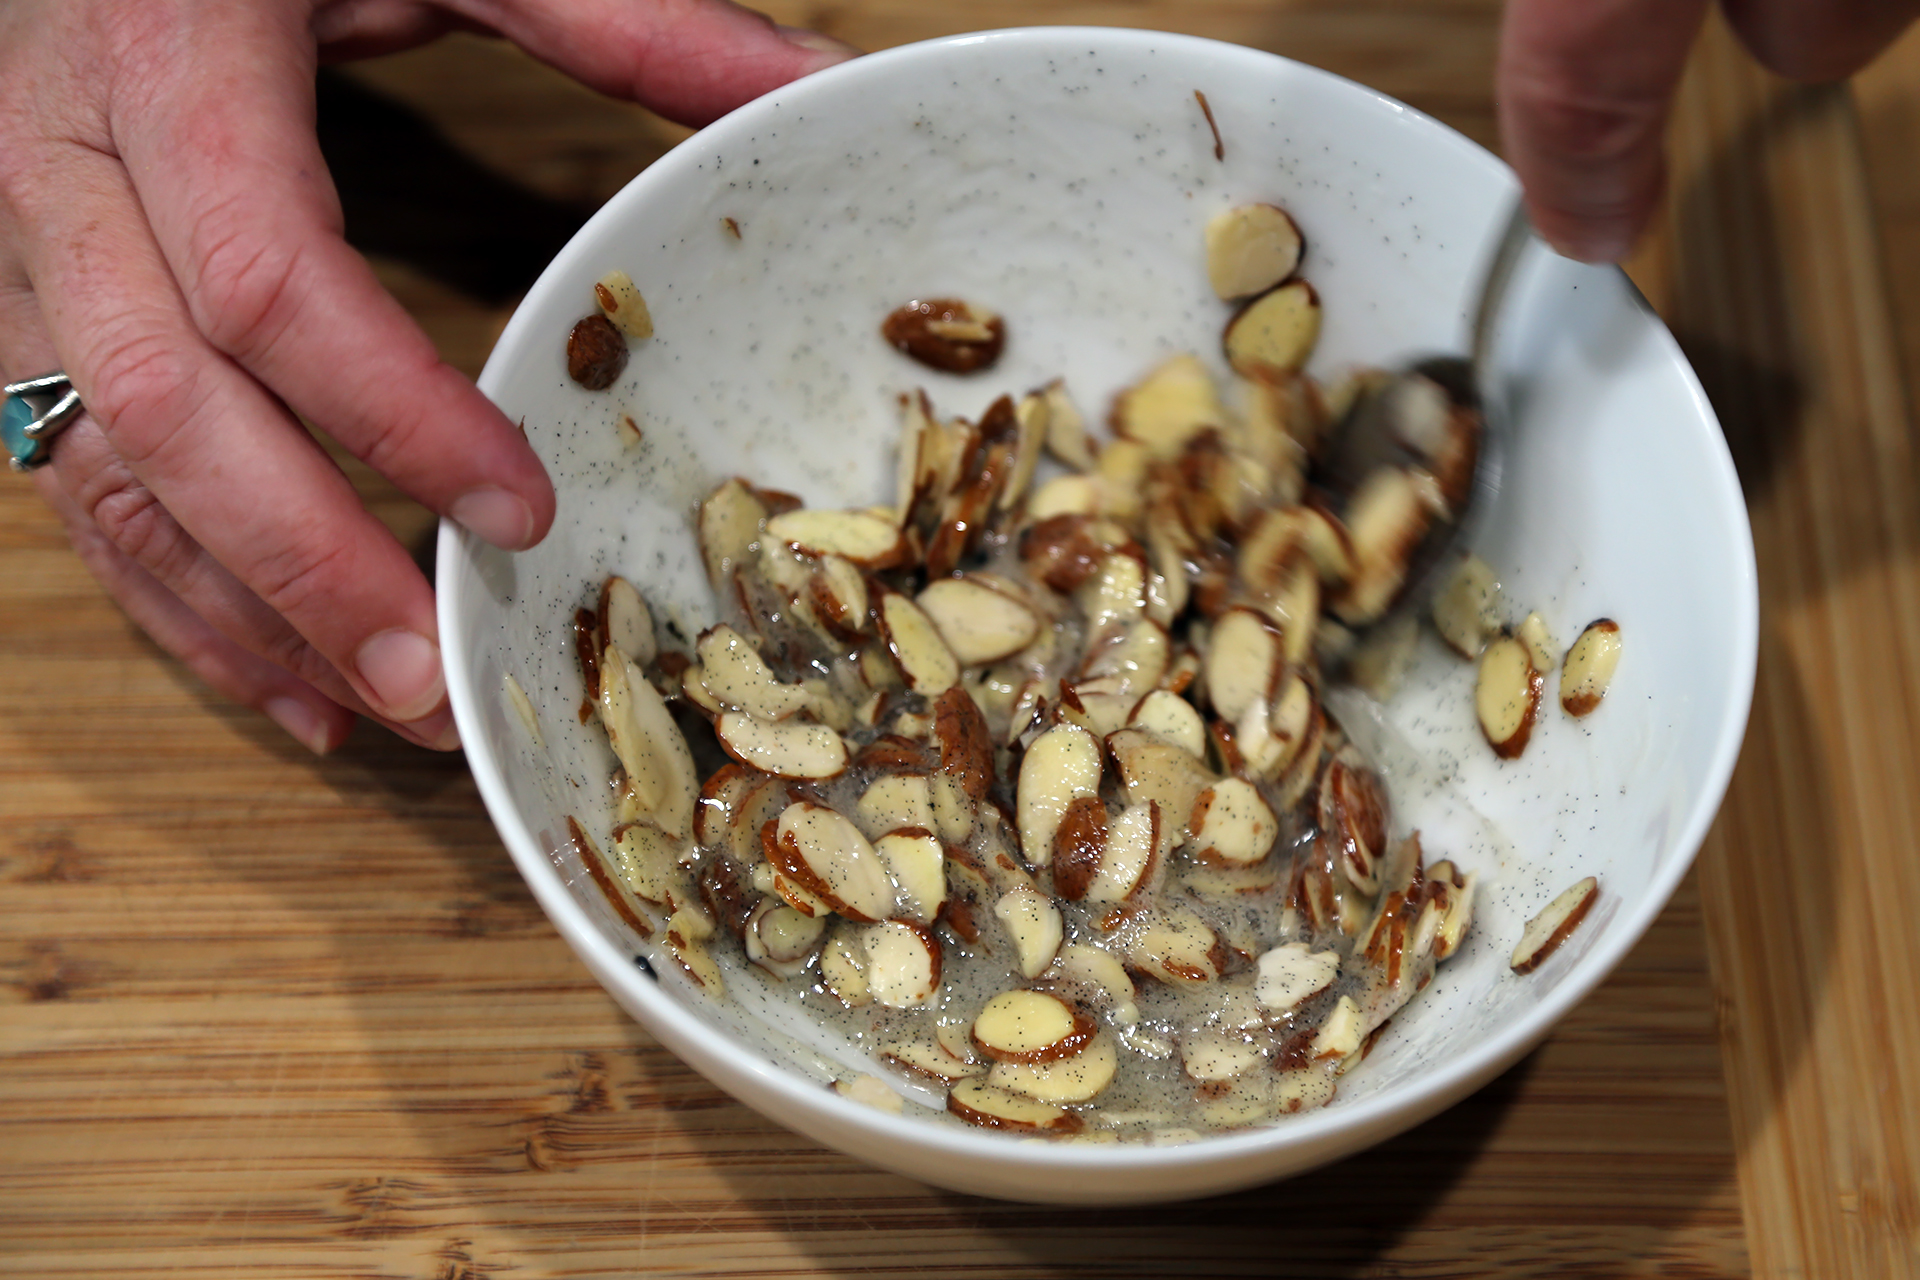 Add the almonds and stir to completely coat. Set aside.